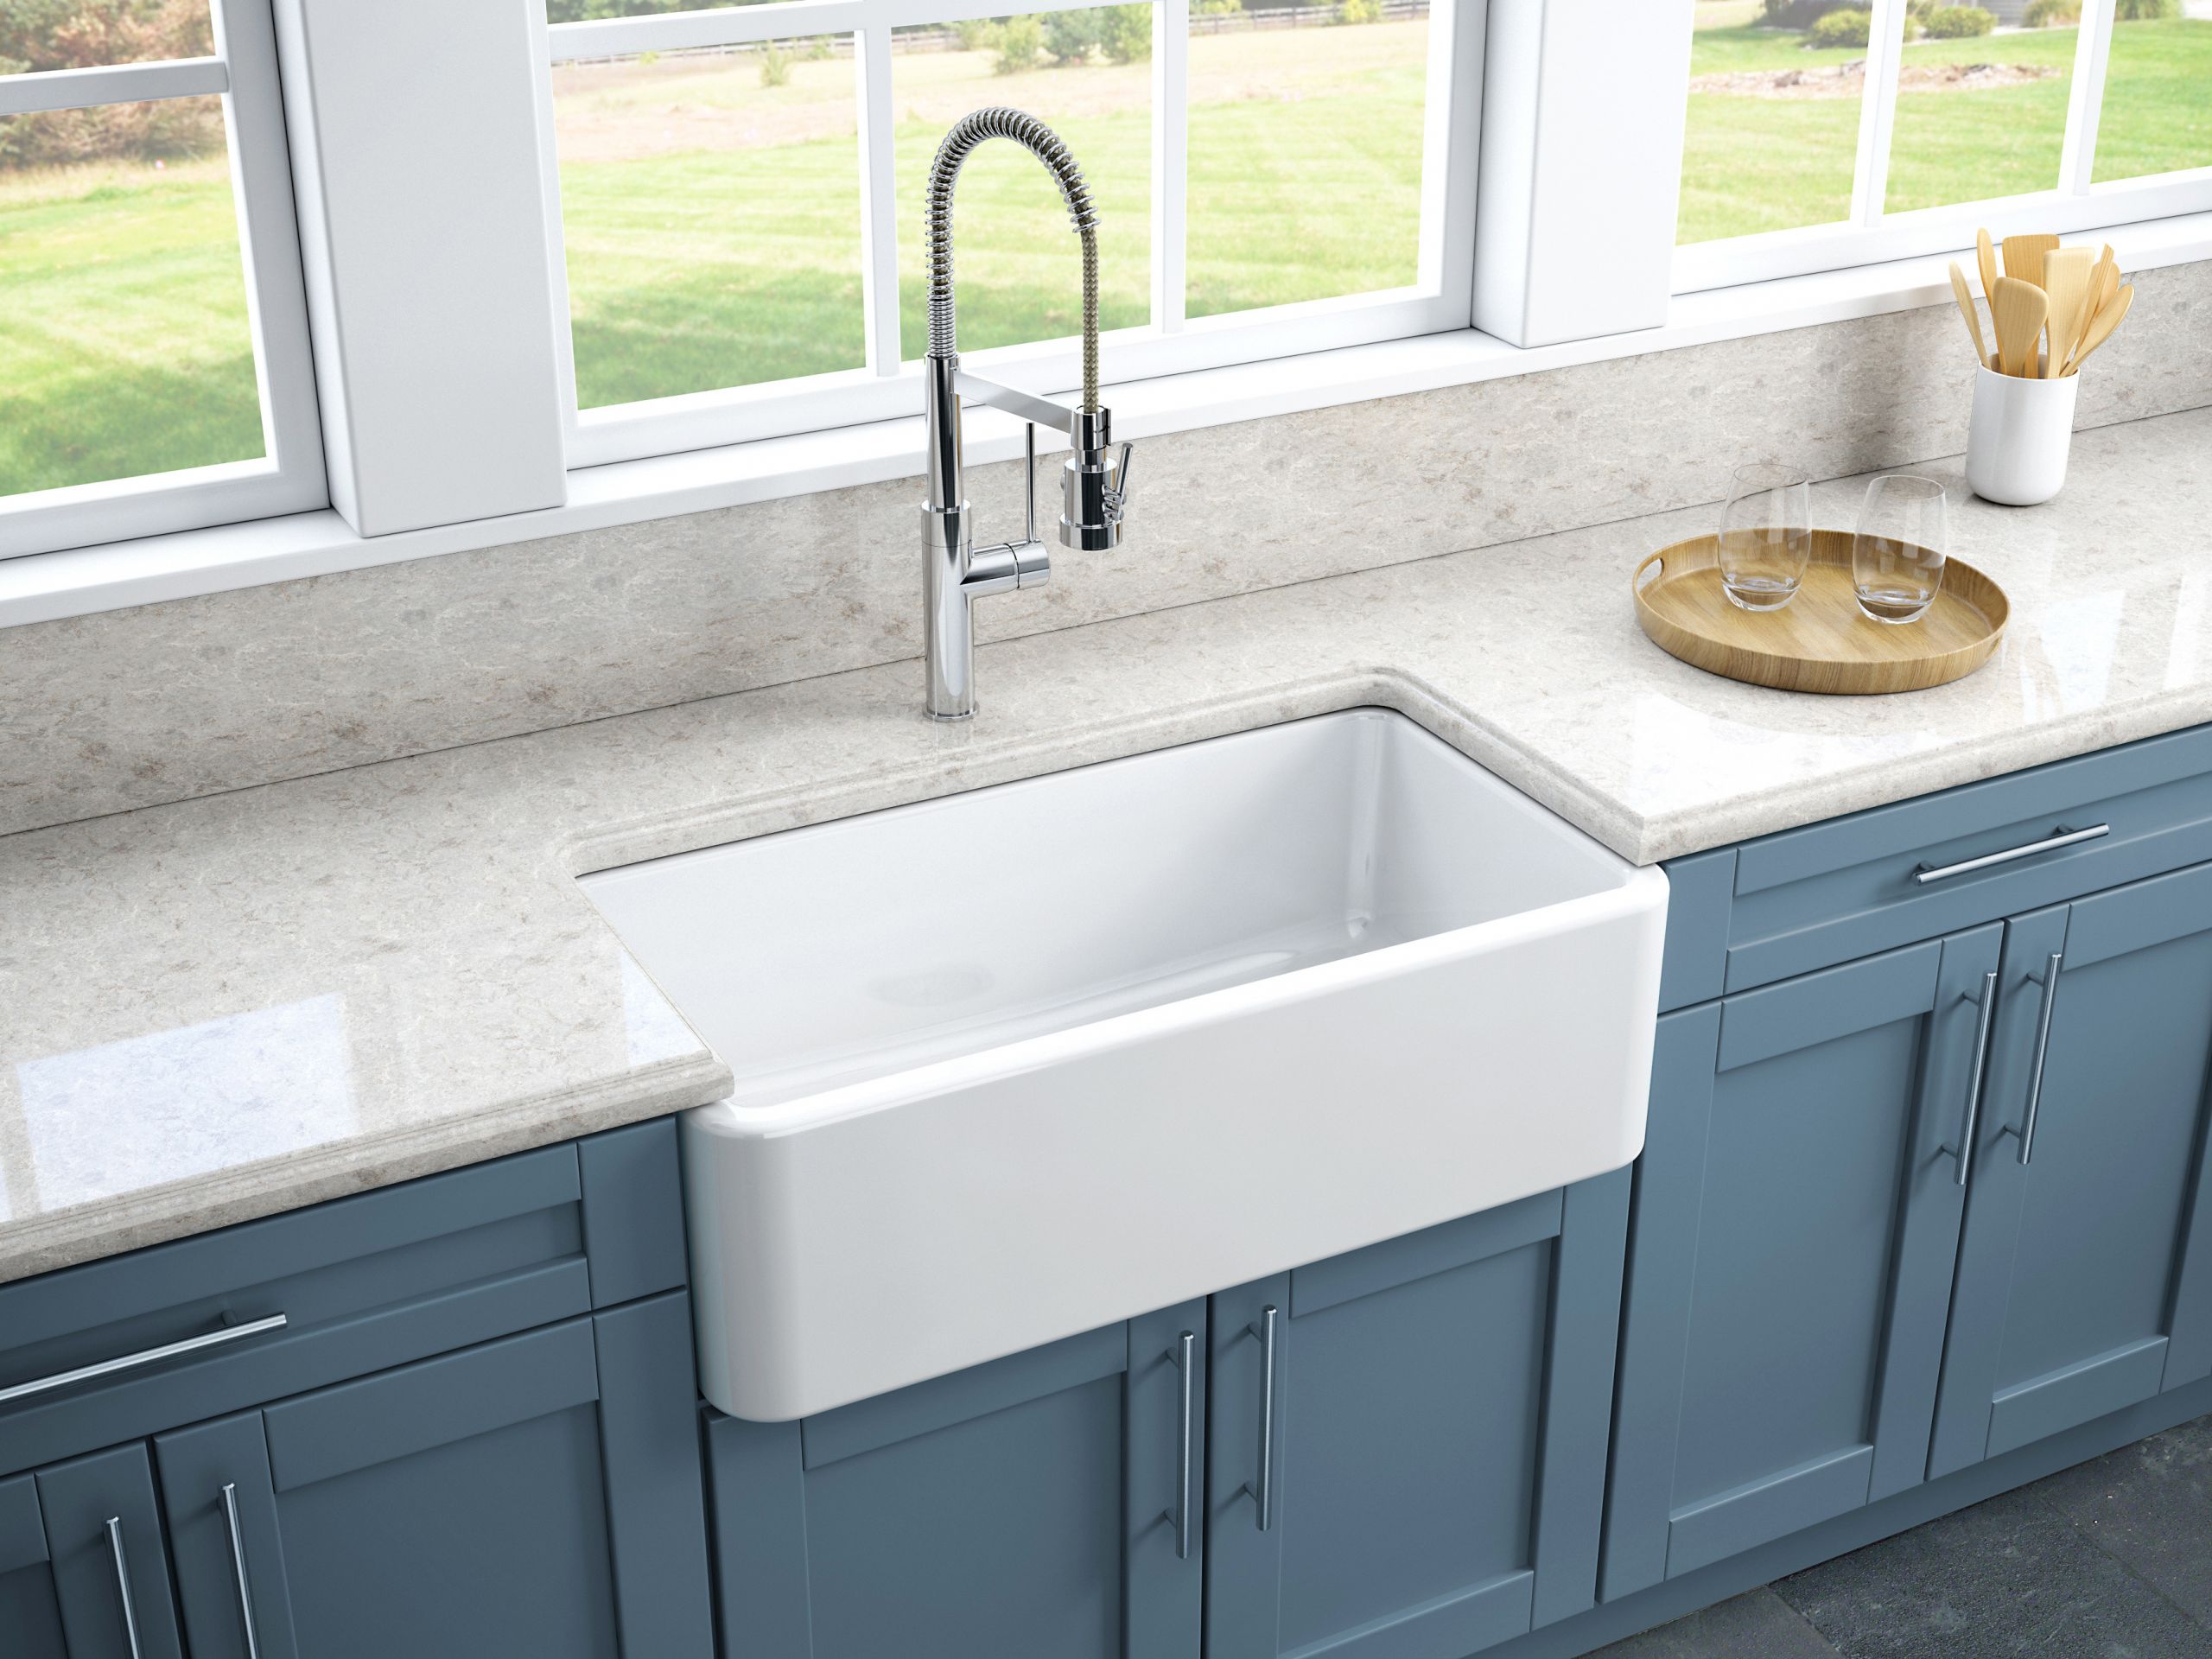 Kitchen Sink And Cabinets
 How to Measure the Base Cabinet for your Kitchen Sink